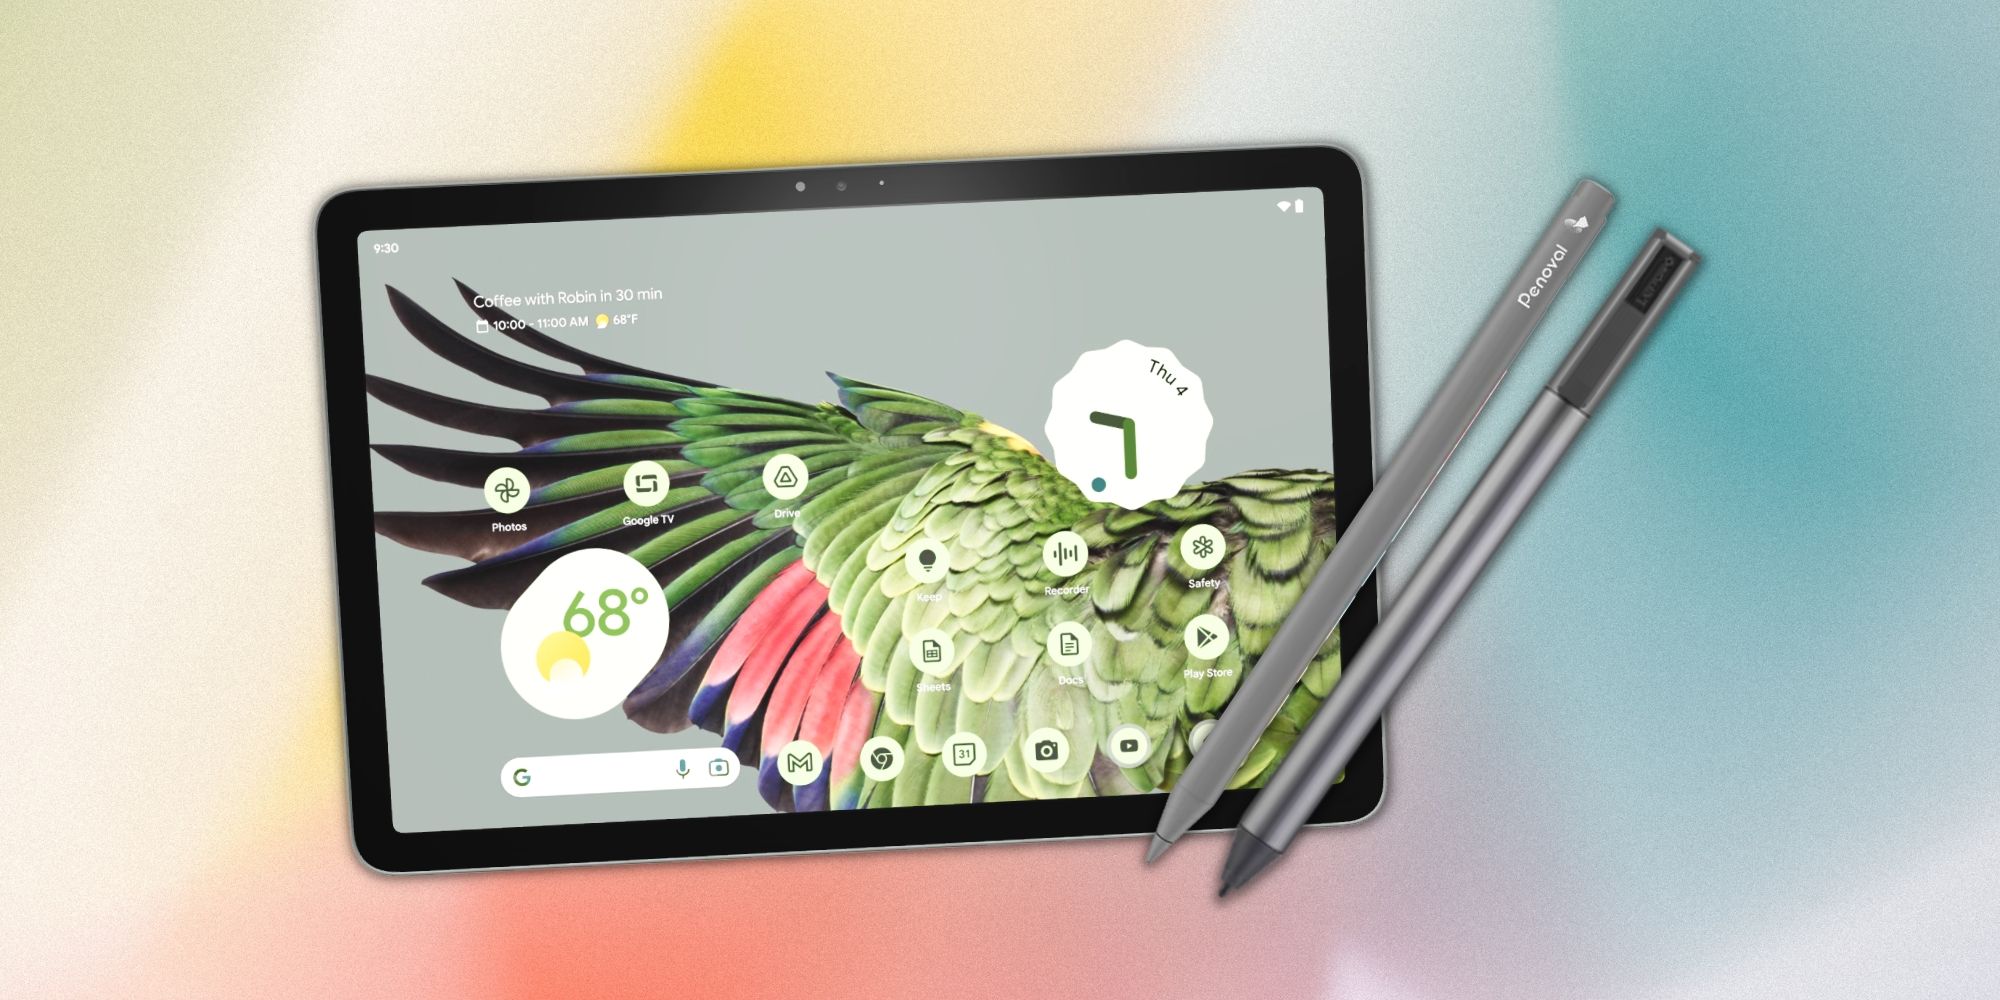 Pixel Tablet with two USI 2.0 compatible styluses